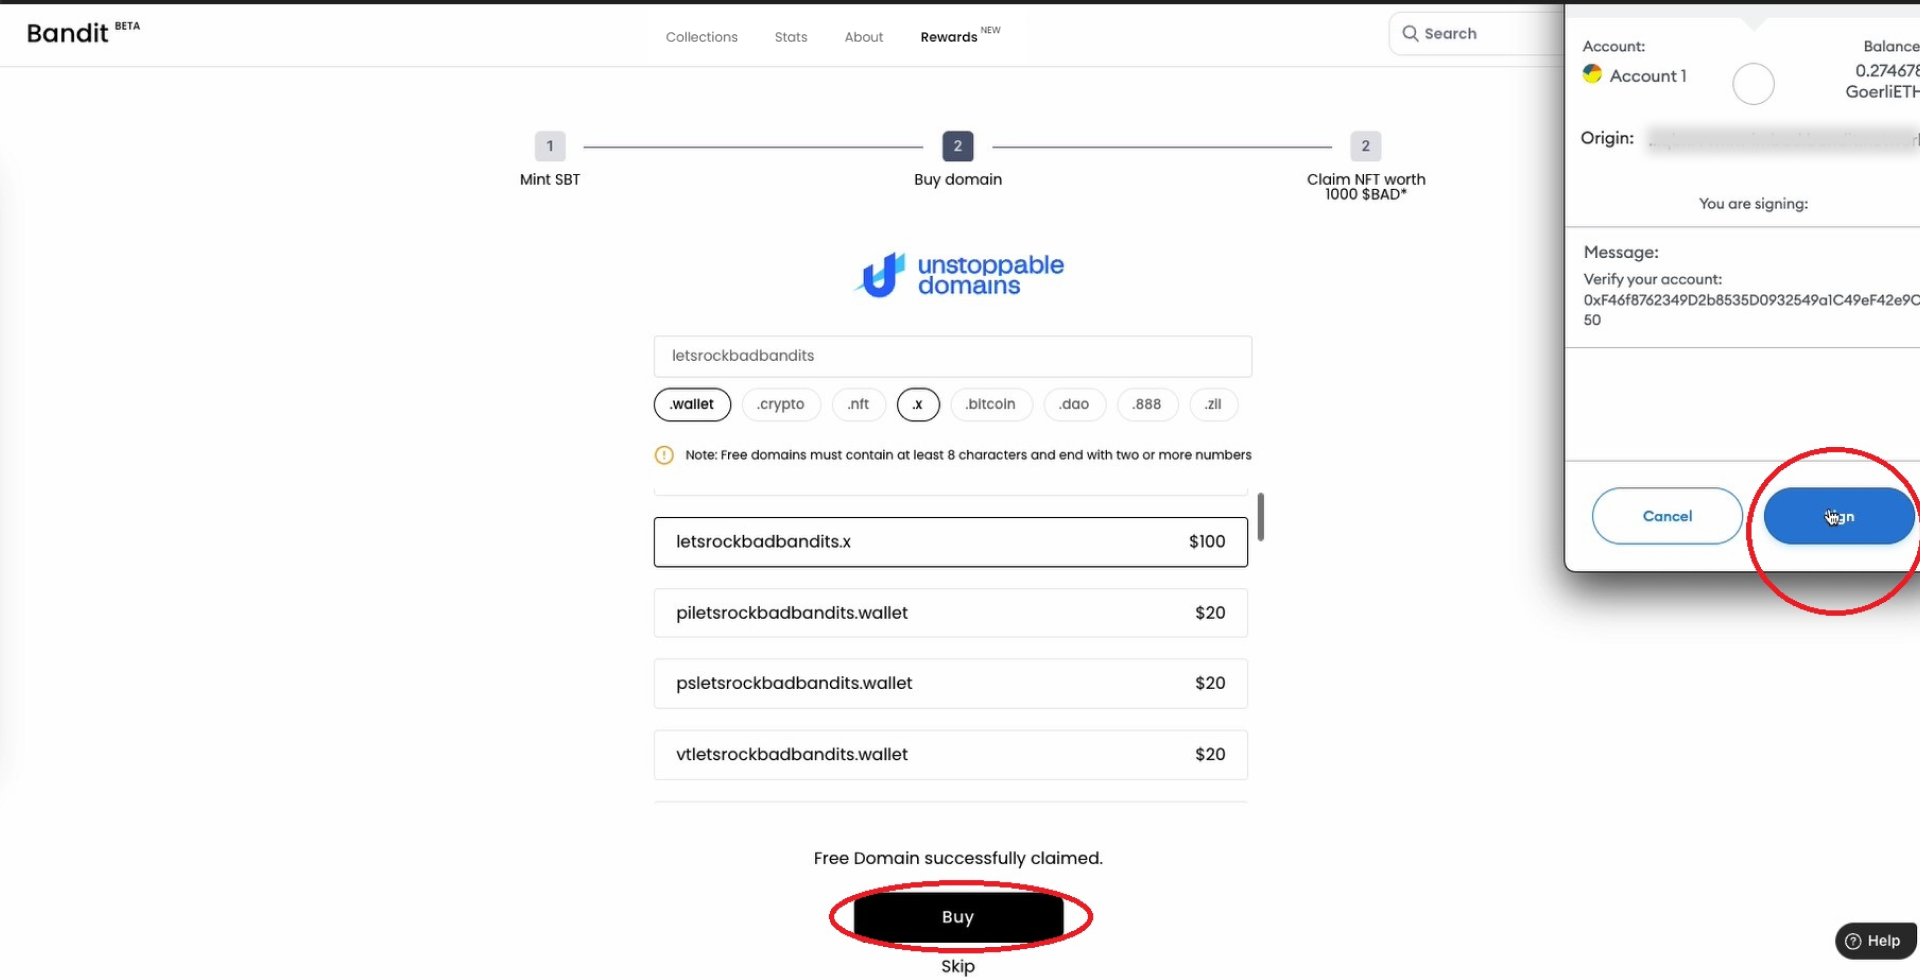 Click on the "Buy" button and sign the transaction in your wallet.